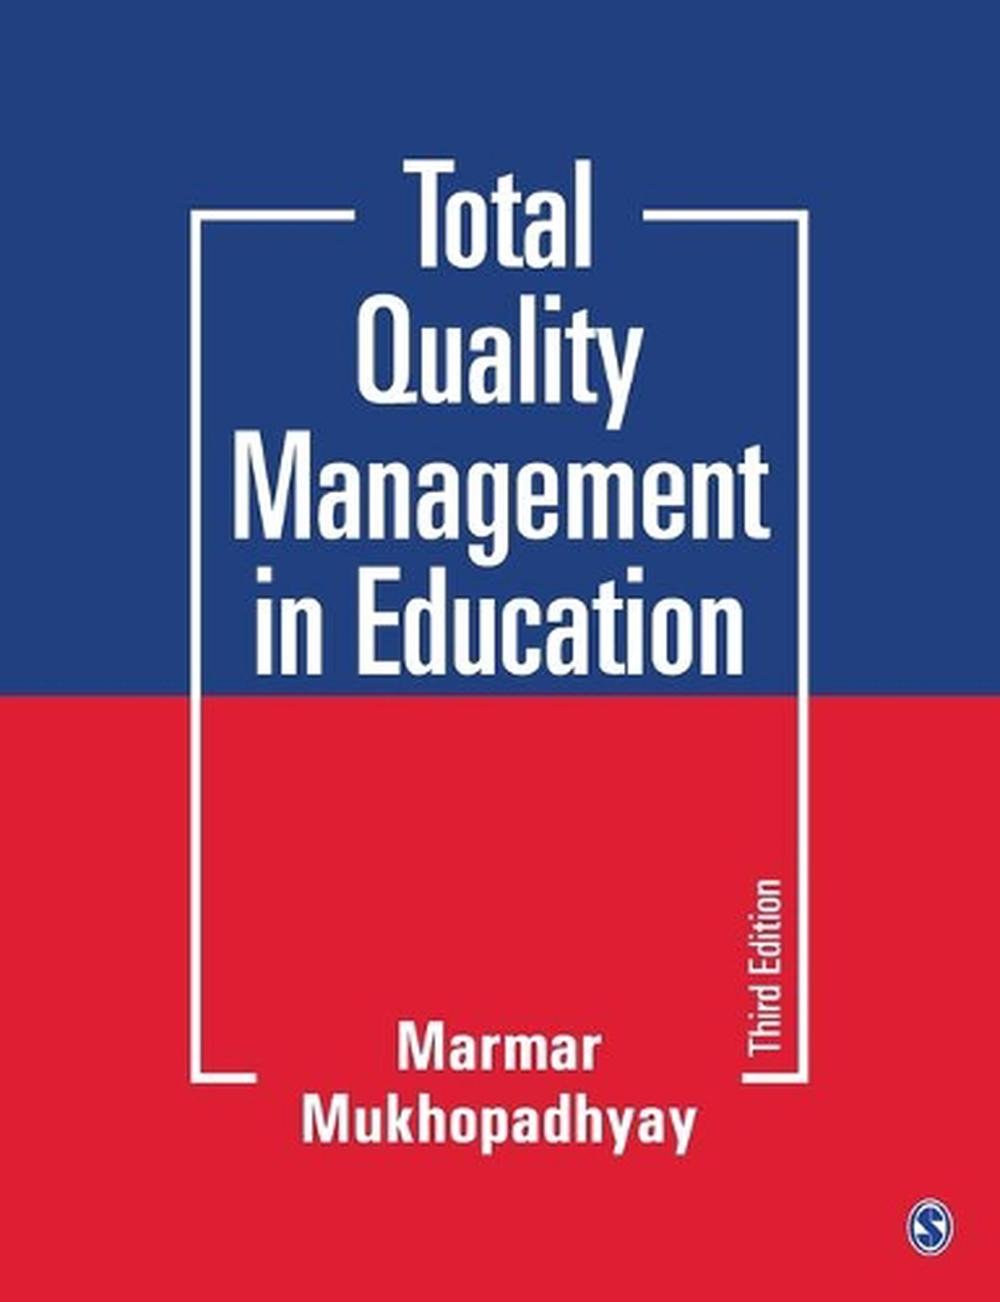 books about quality education